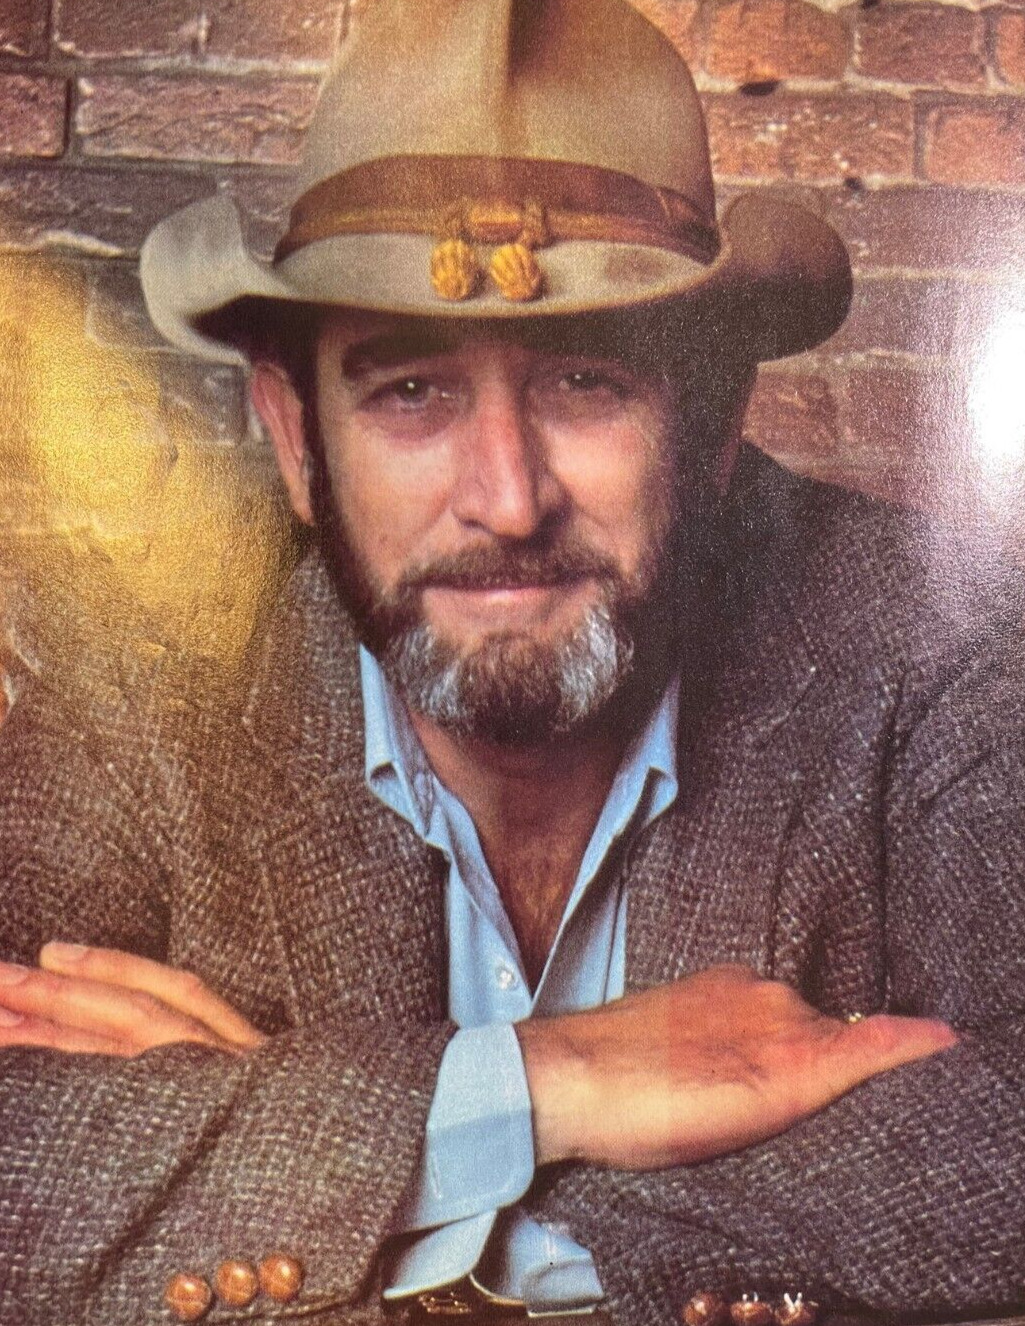 1984 Country Singer Don Williams